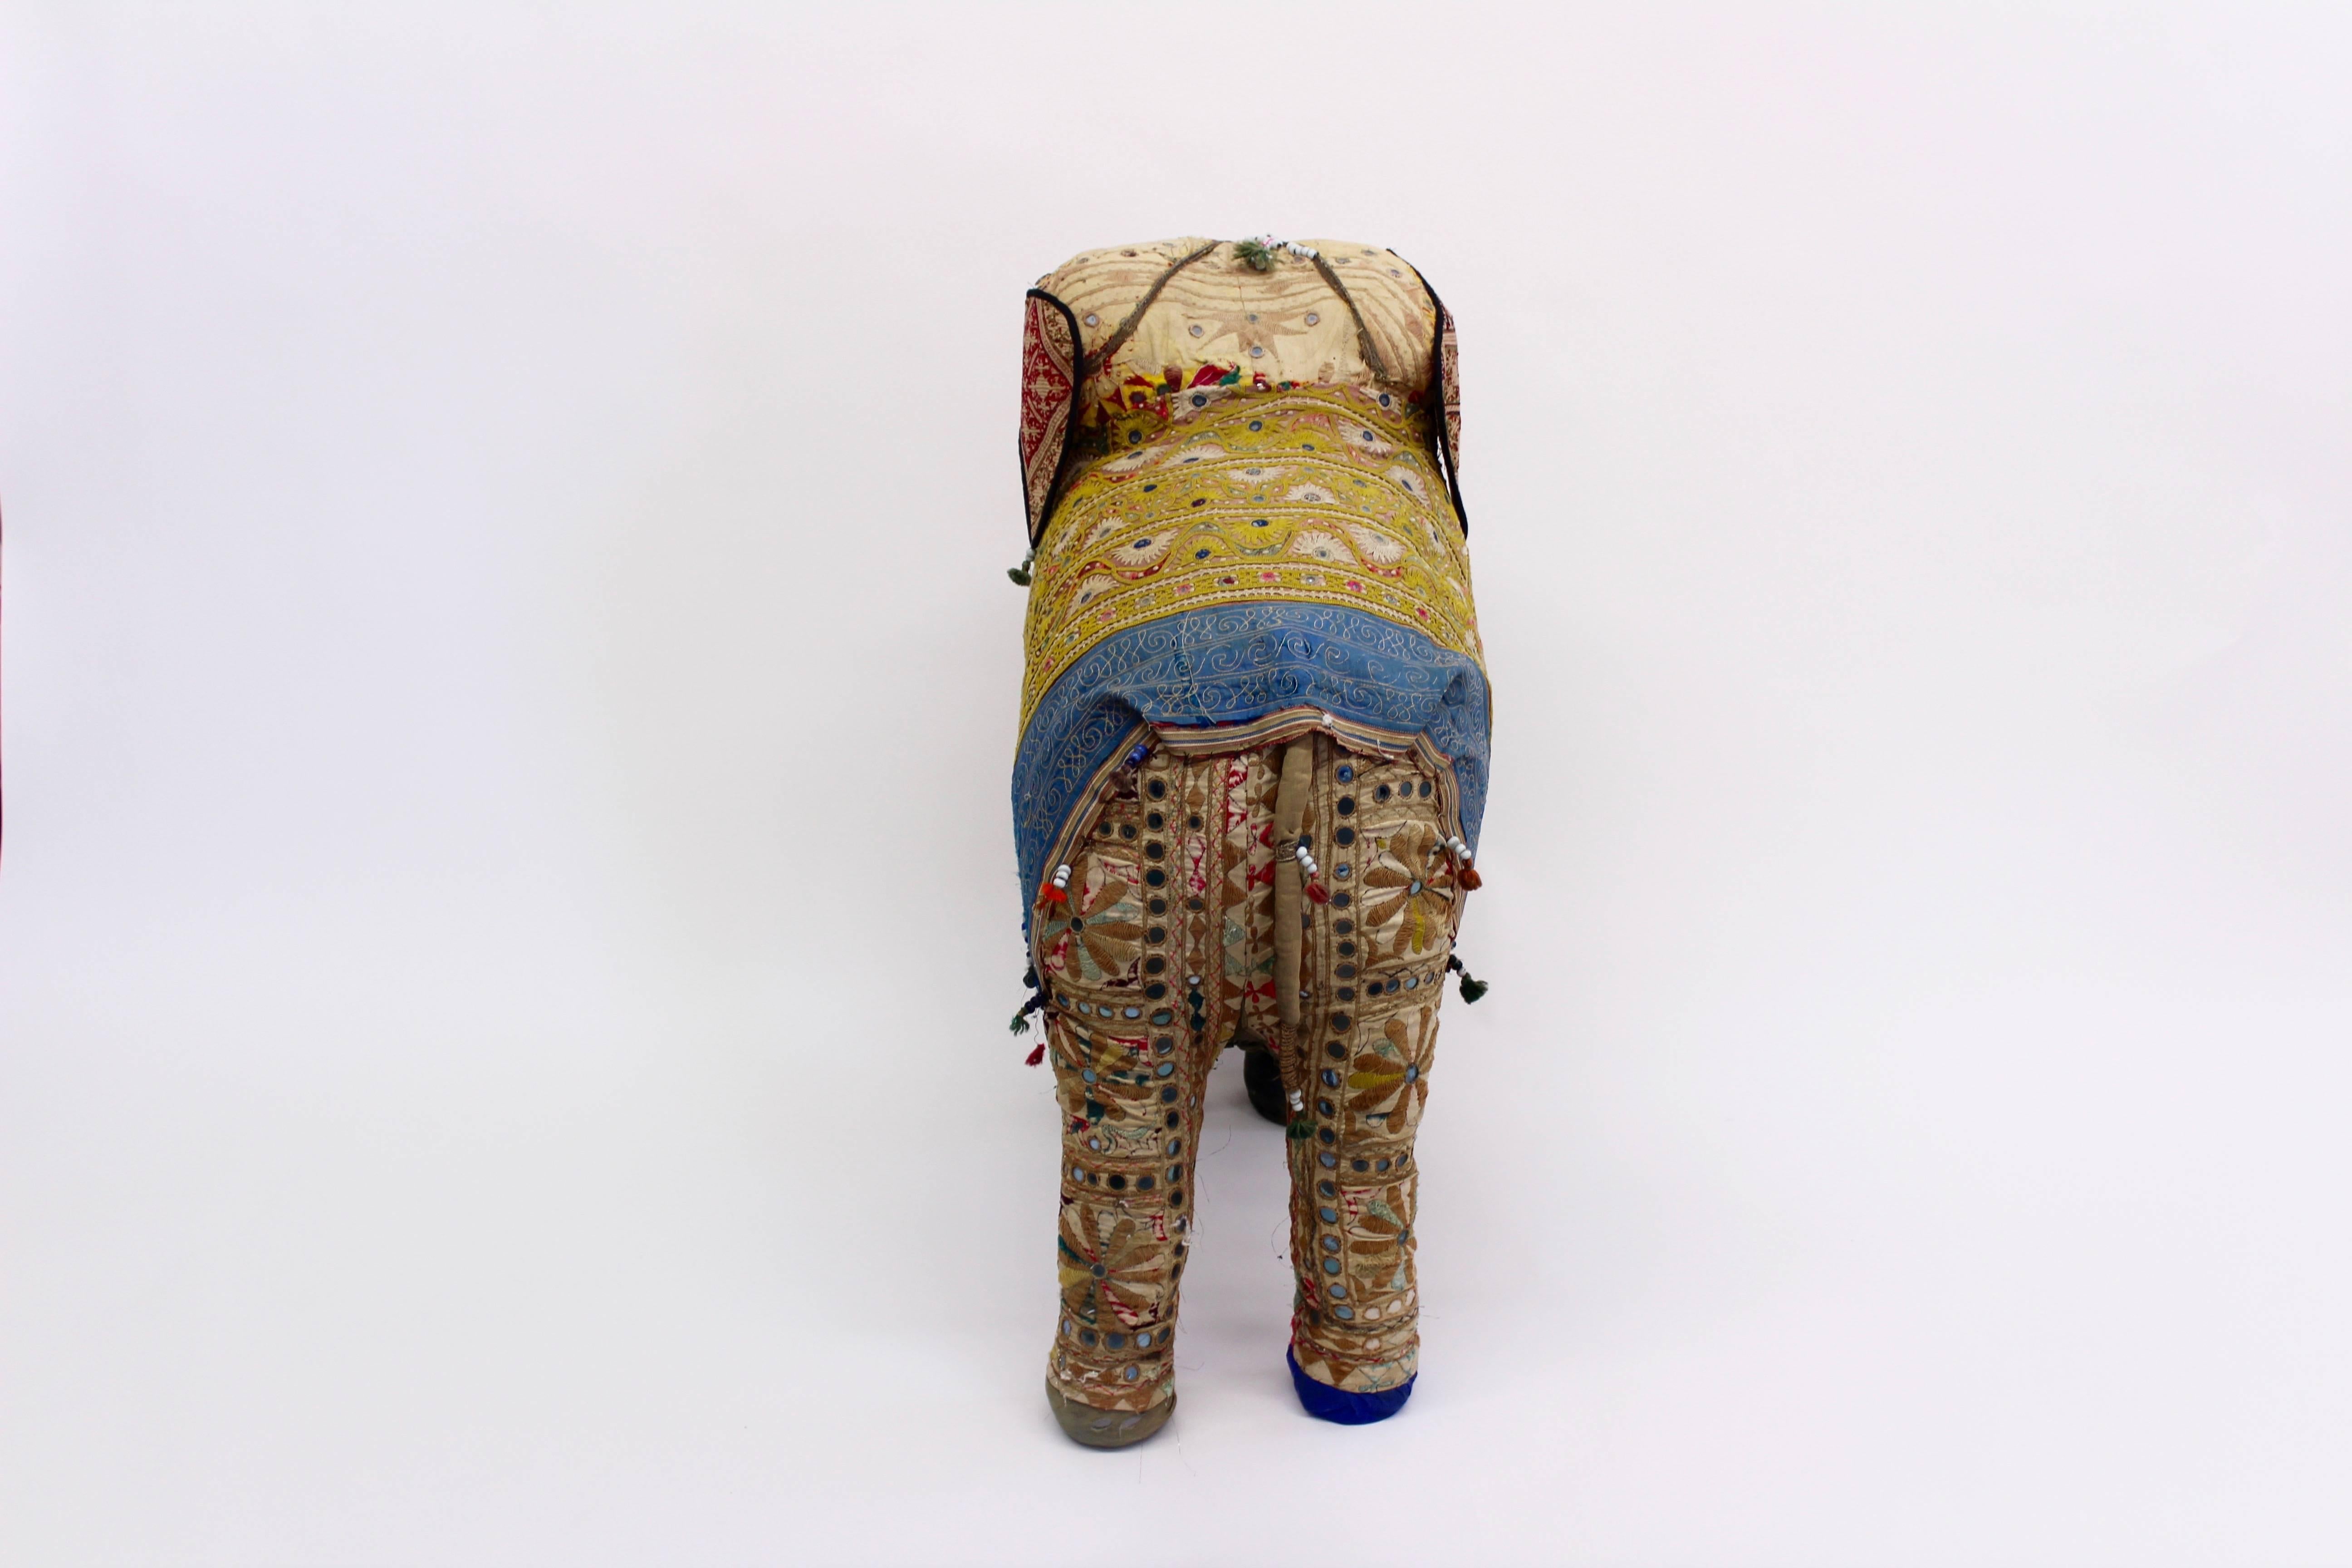 Whimsical, extra large, stuffed elephant covered in vintage textiles, beadwork and other embellishments. From India, 1950s.